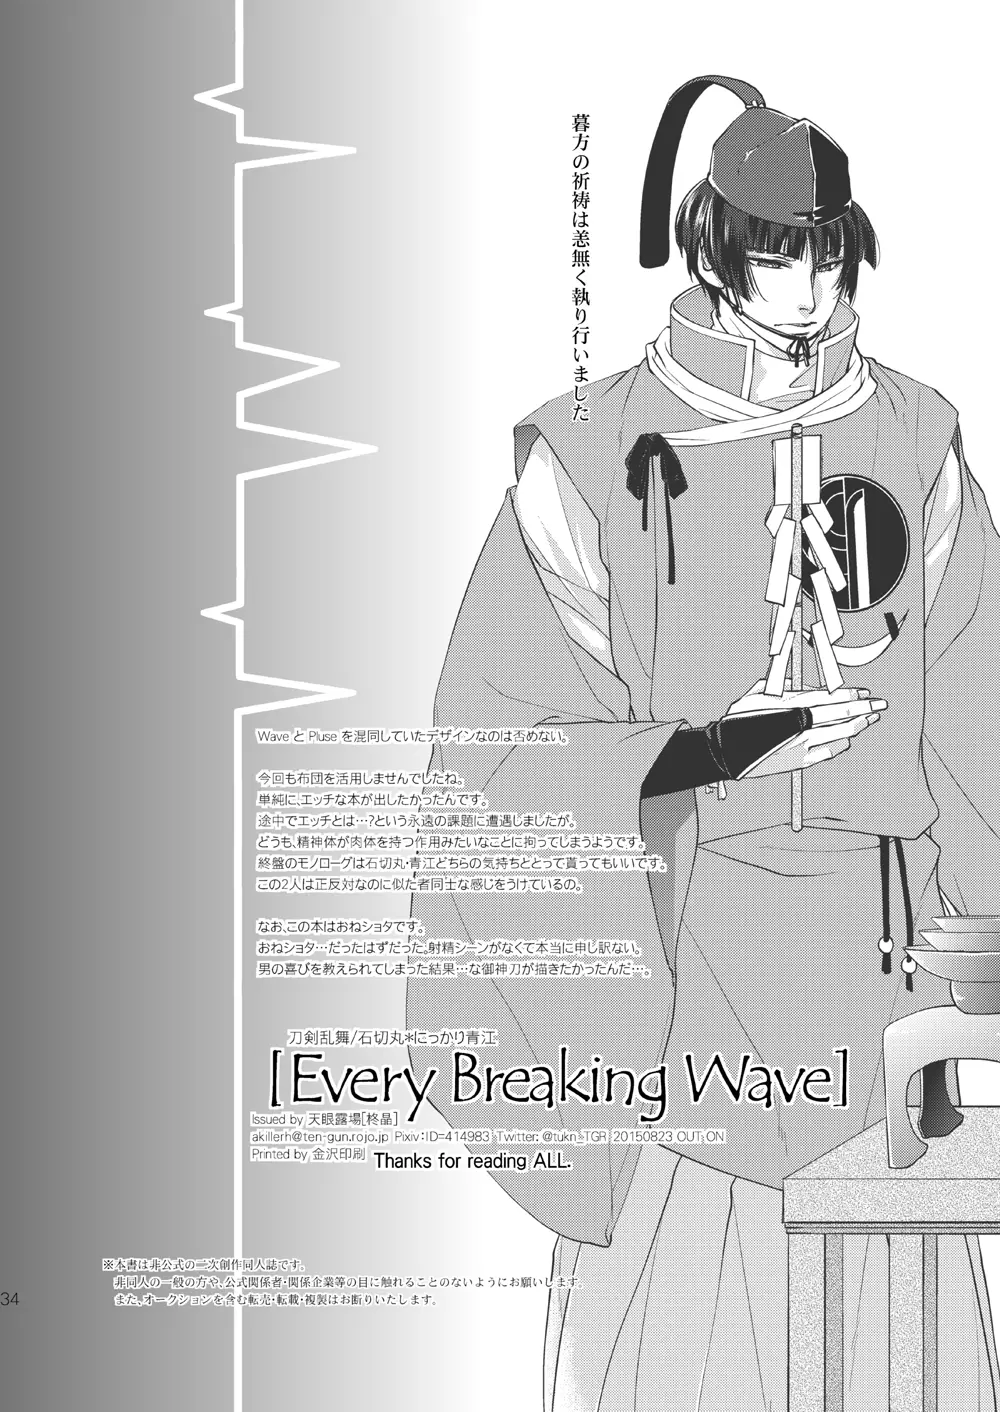 Every Breaking Wave 33ページ